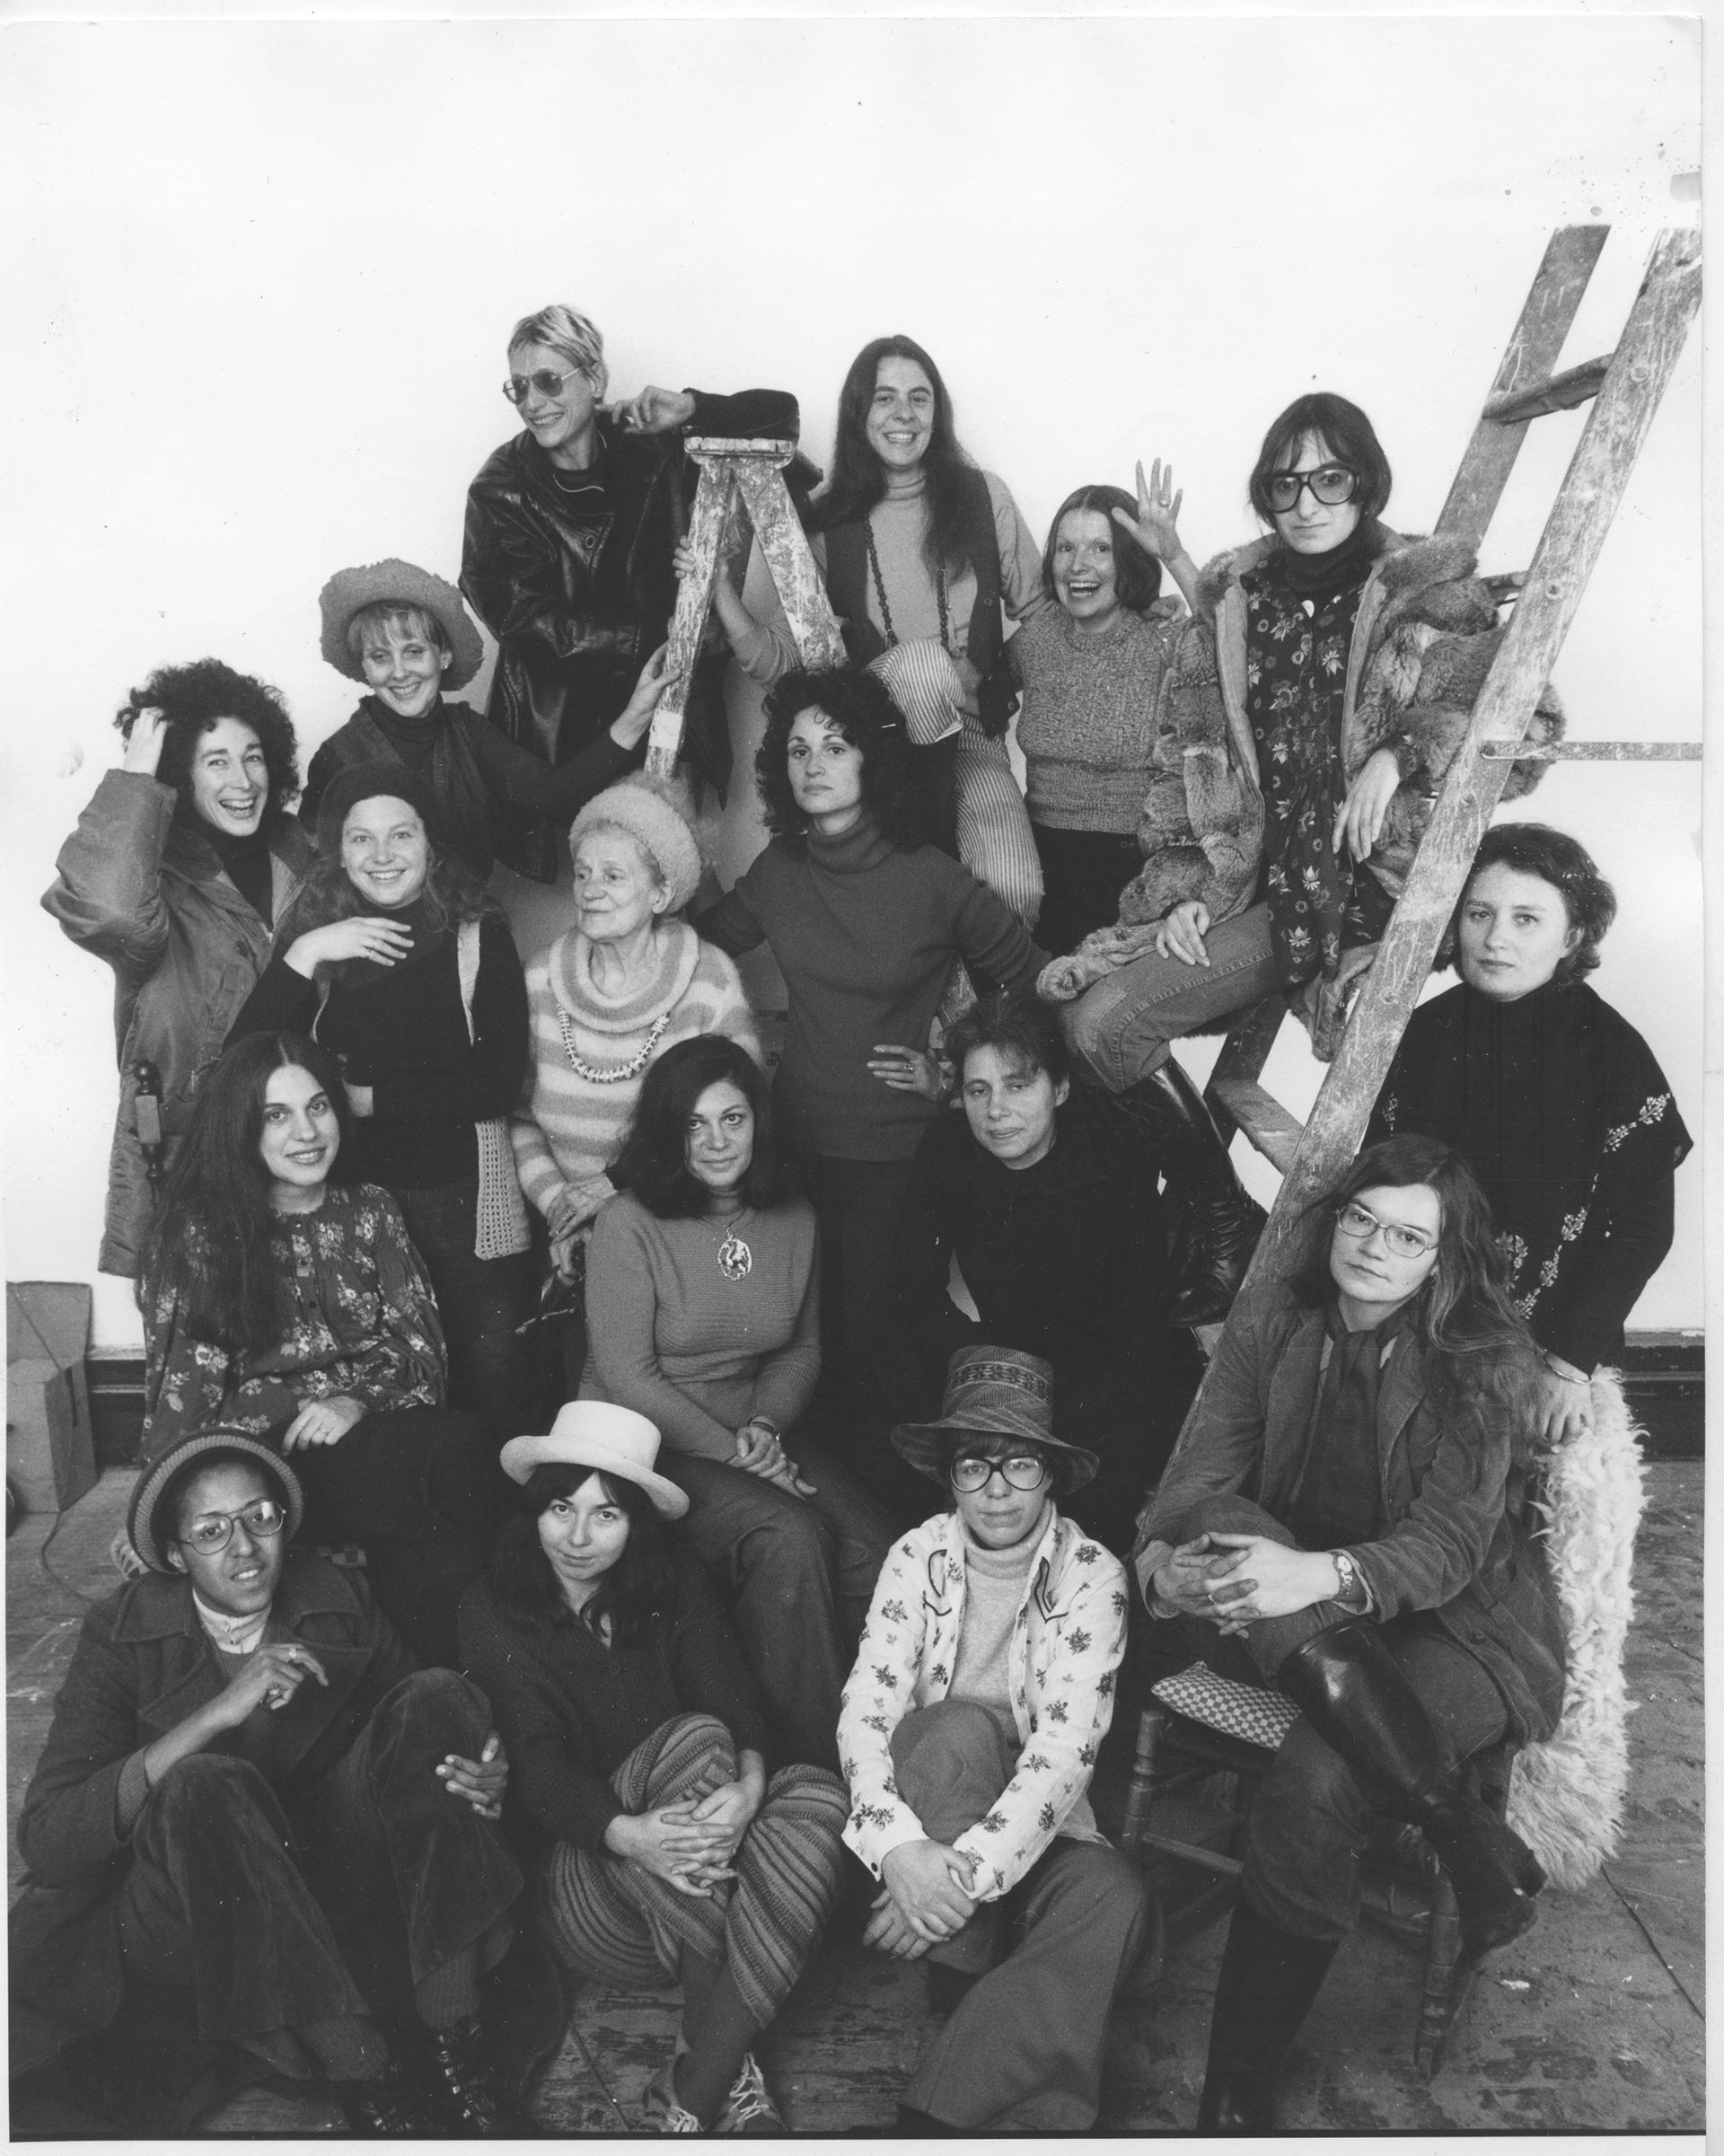 Making history: the all-female founding members of the artist-run A.I.R. Gallery in New York, 1974 Photo: David Attie